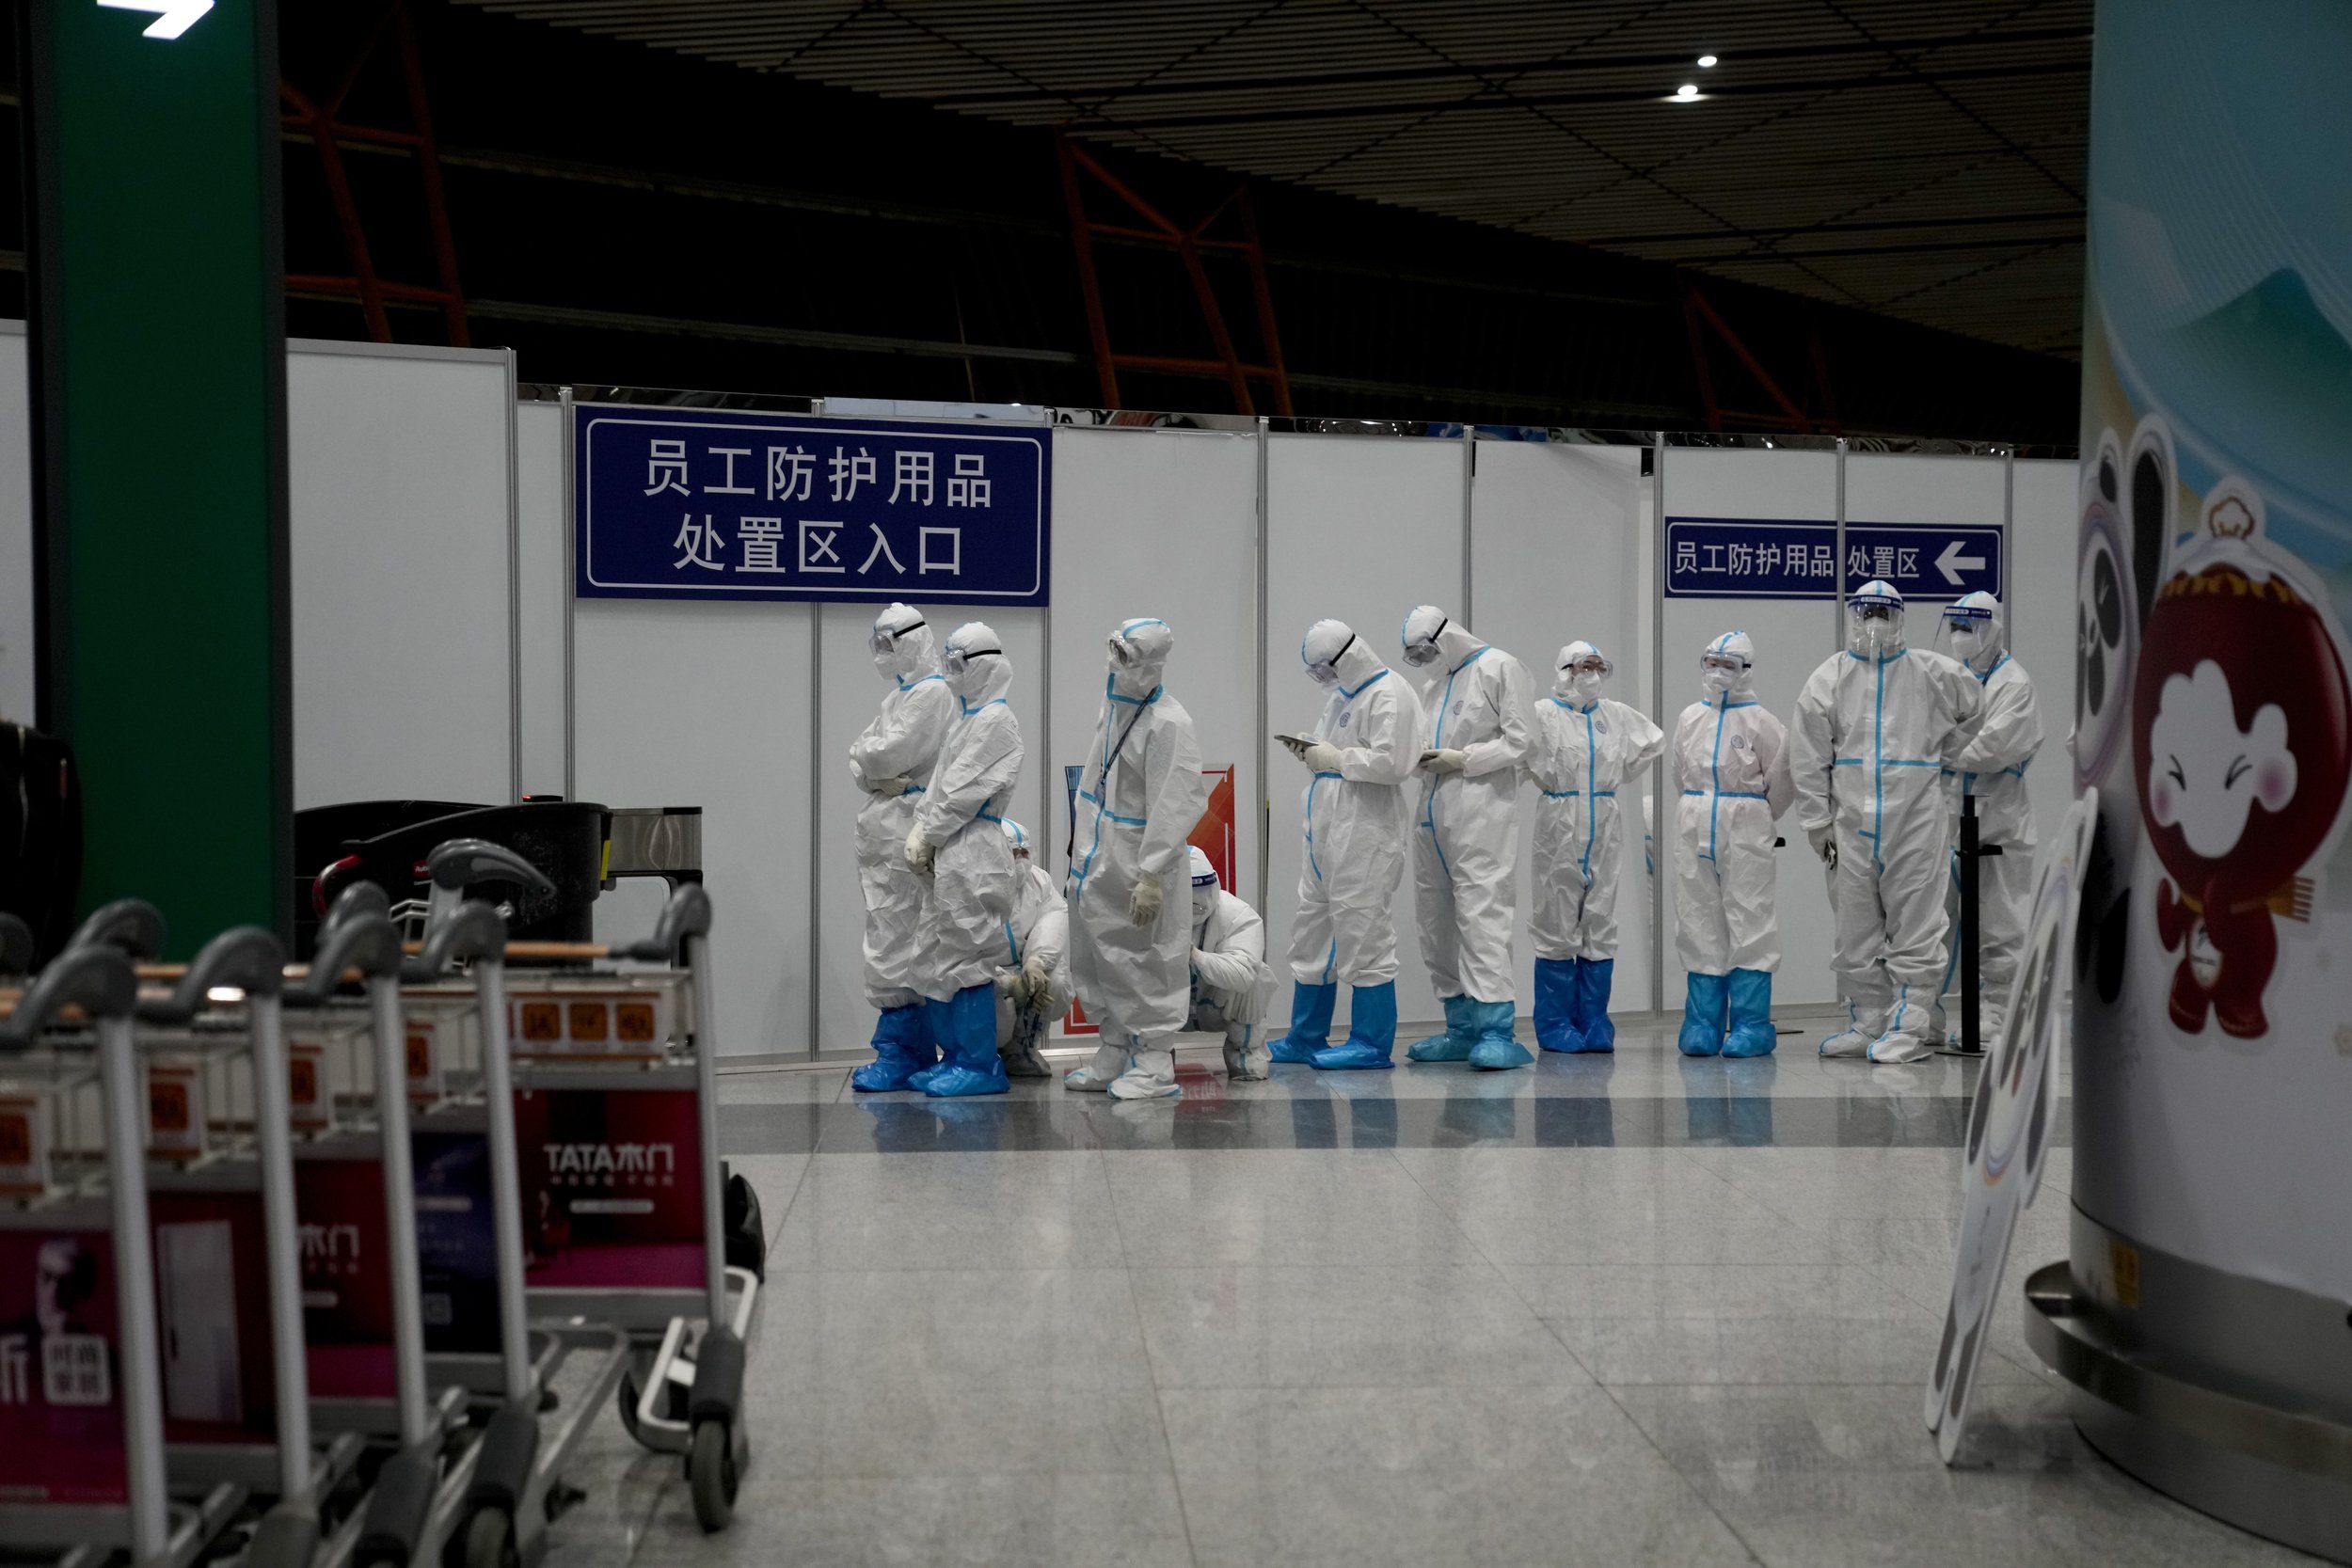  Olympic workers in protective clothing stand at the Beijing Capital International Airport after the 2022 Winter Olympics, Monday, Feb. 21, 2022, in Beijing. (AP Photo/Natacha Pisarenko) 